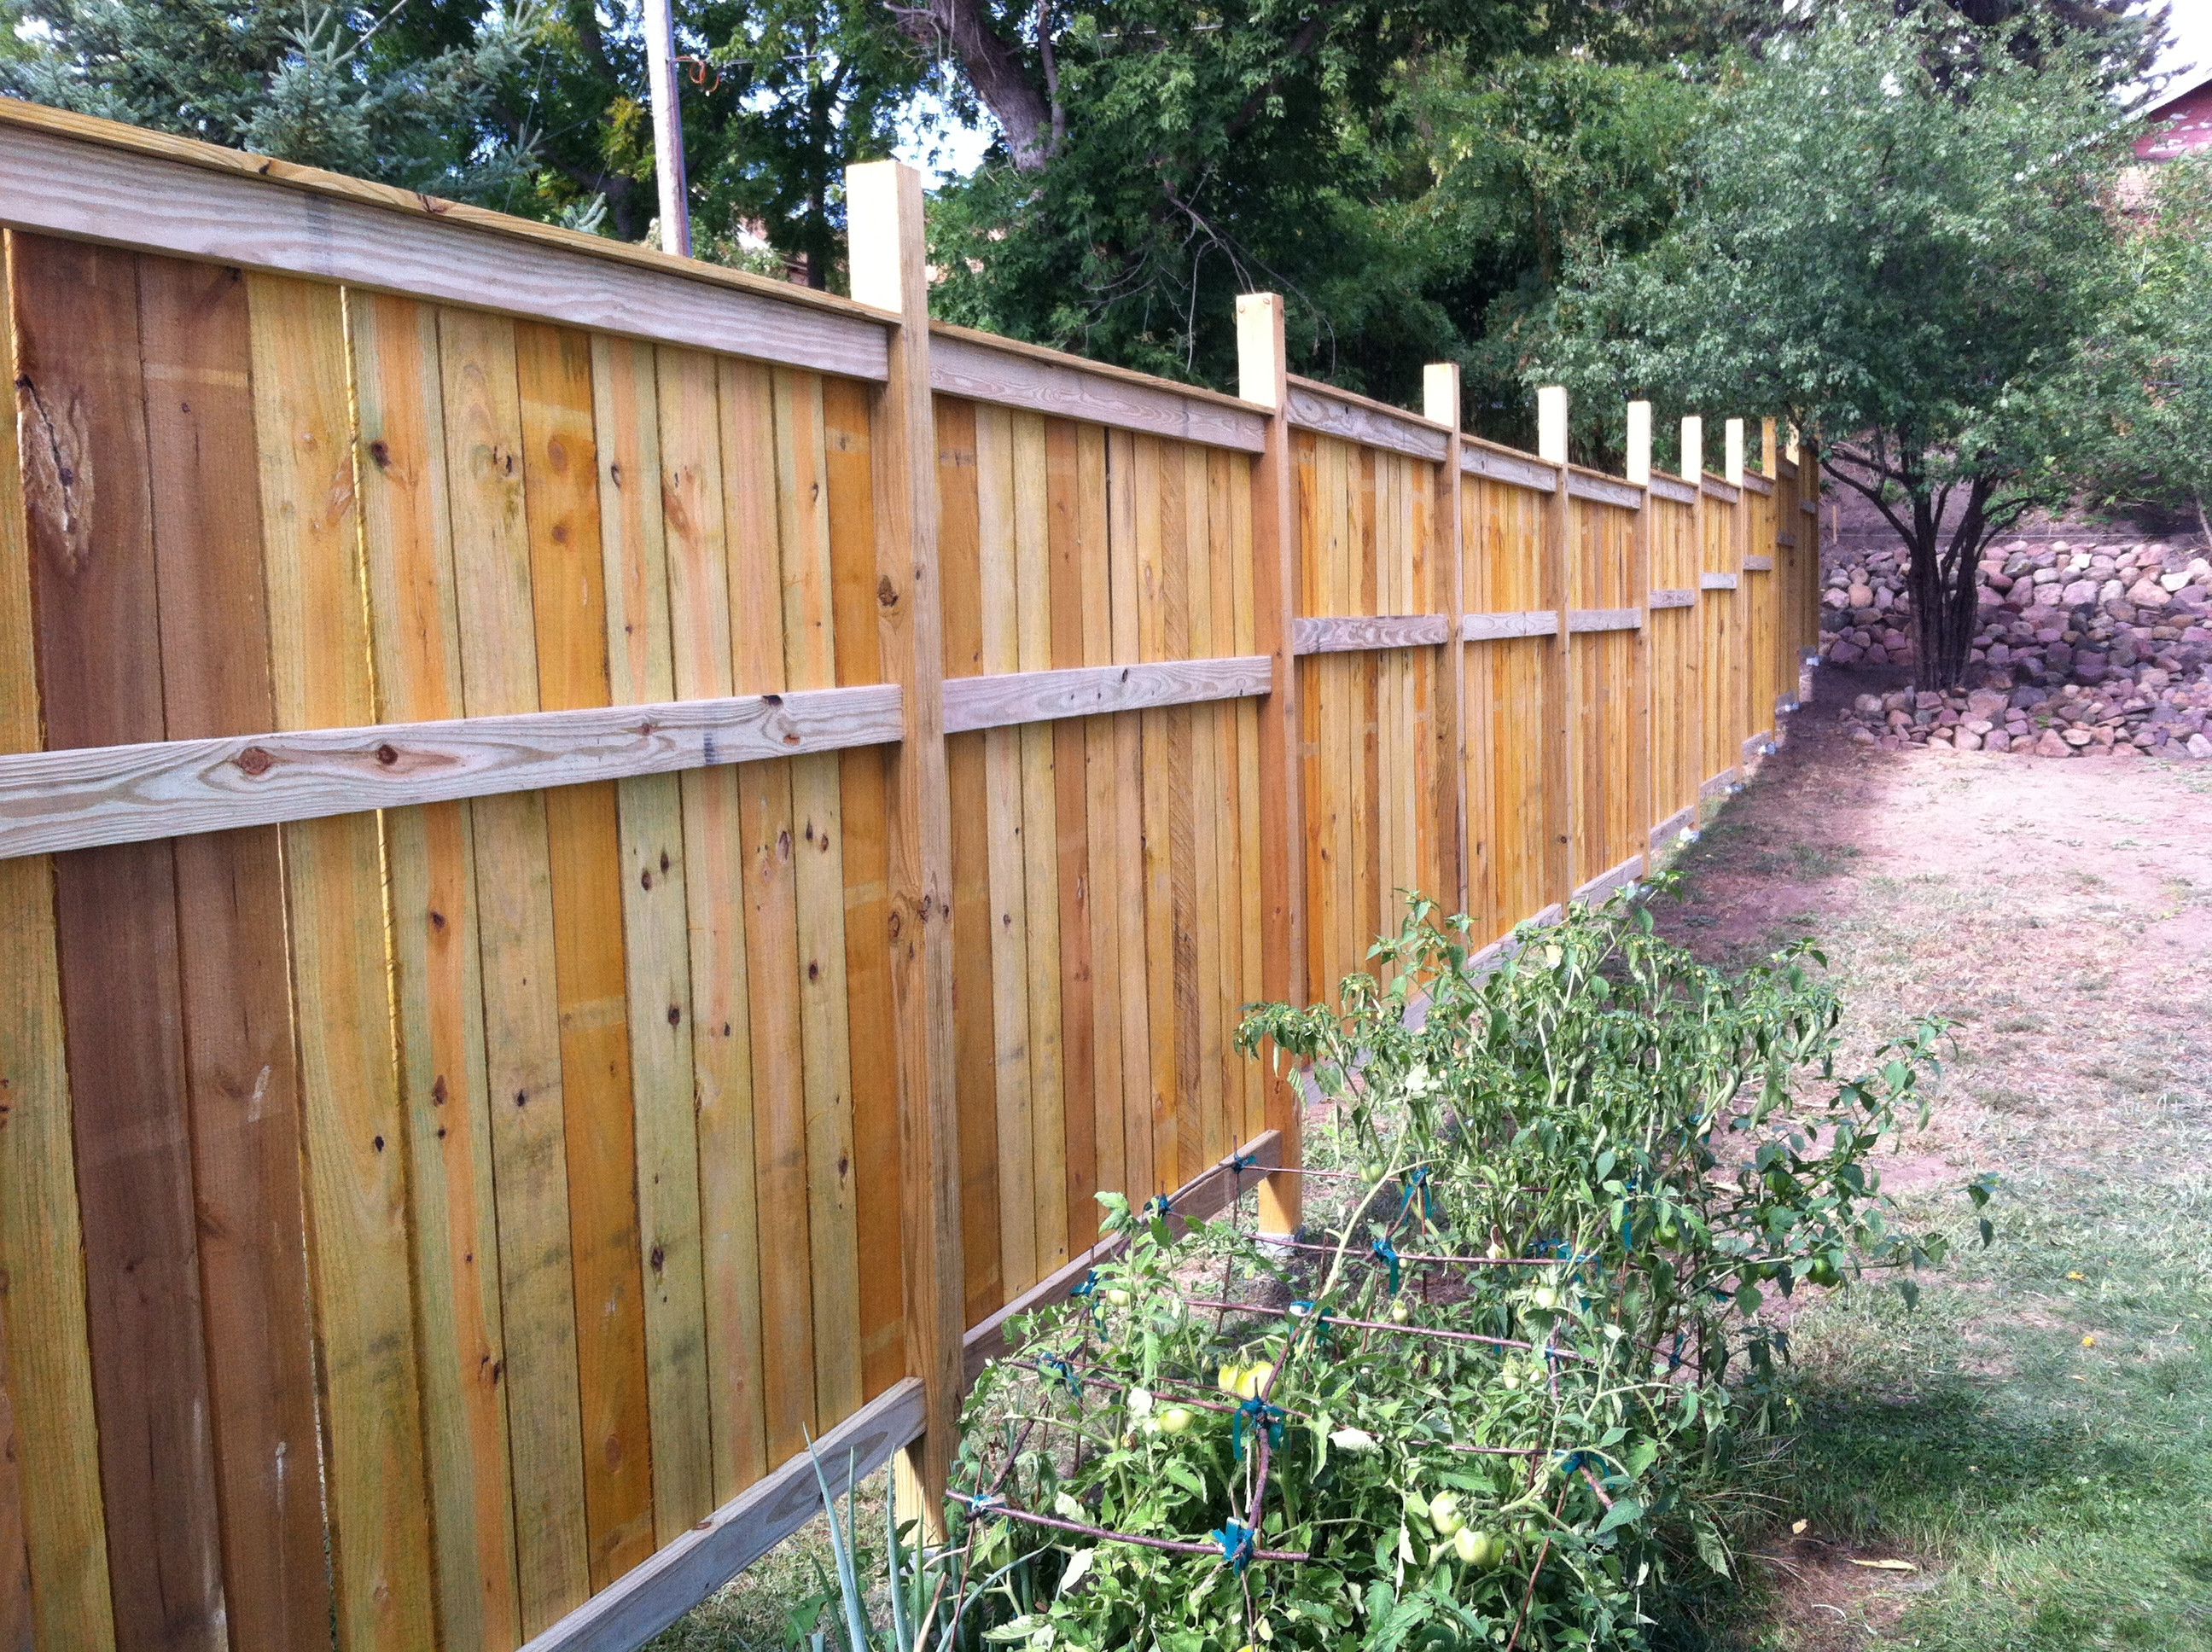 Best ideas about DIY Fence Plans . Save or Pin Ana White Now.